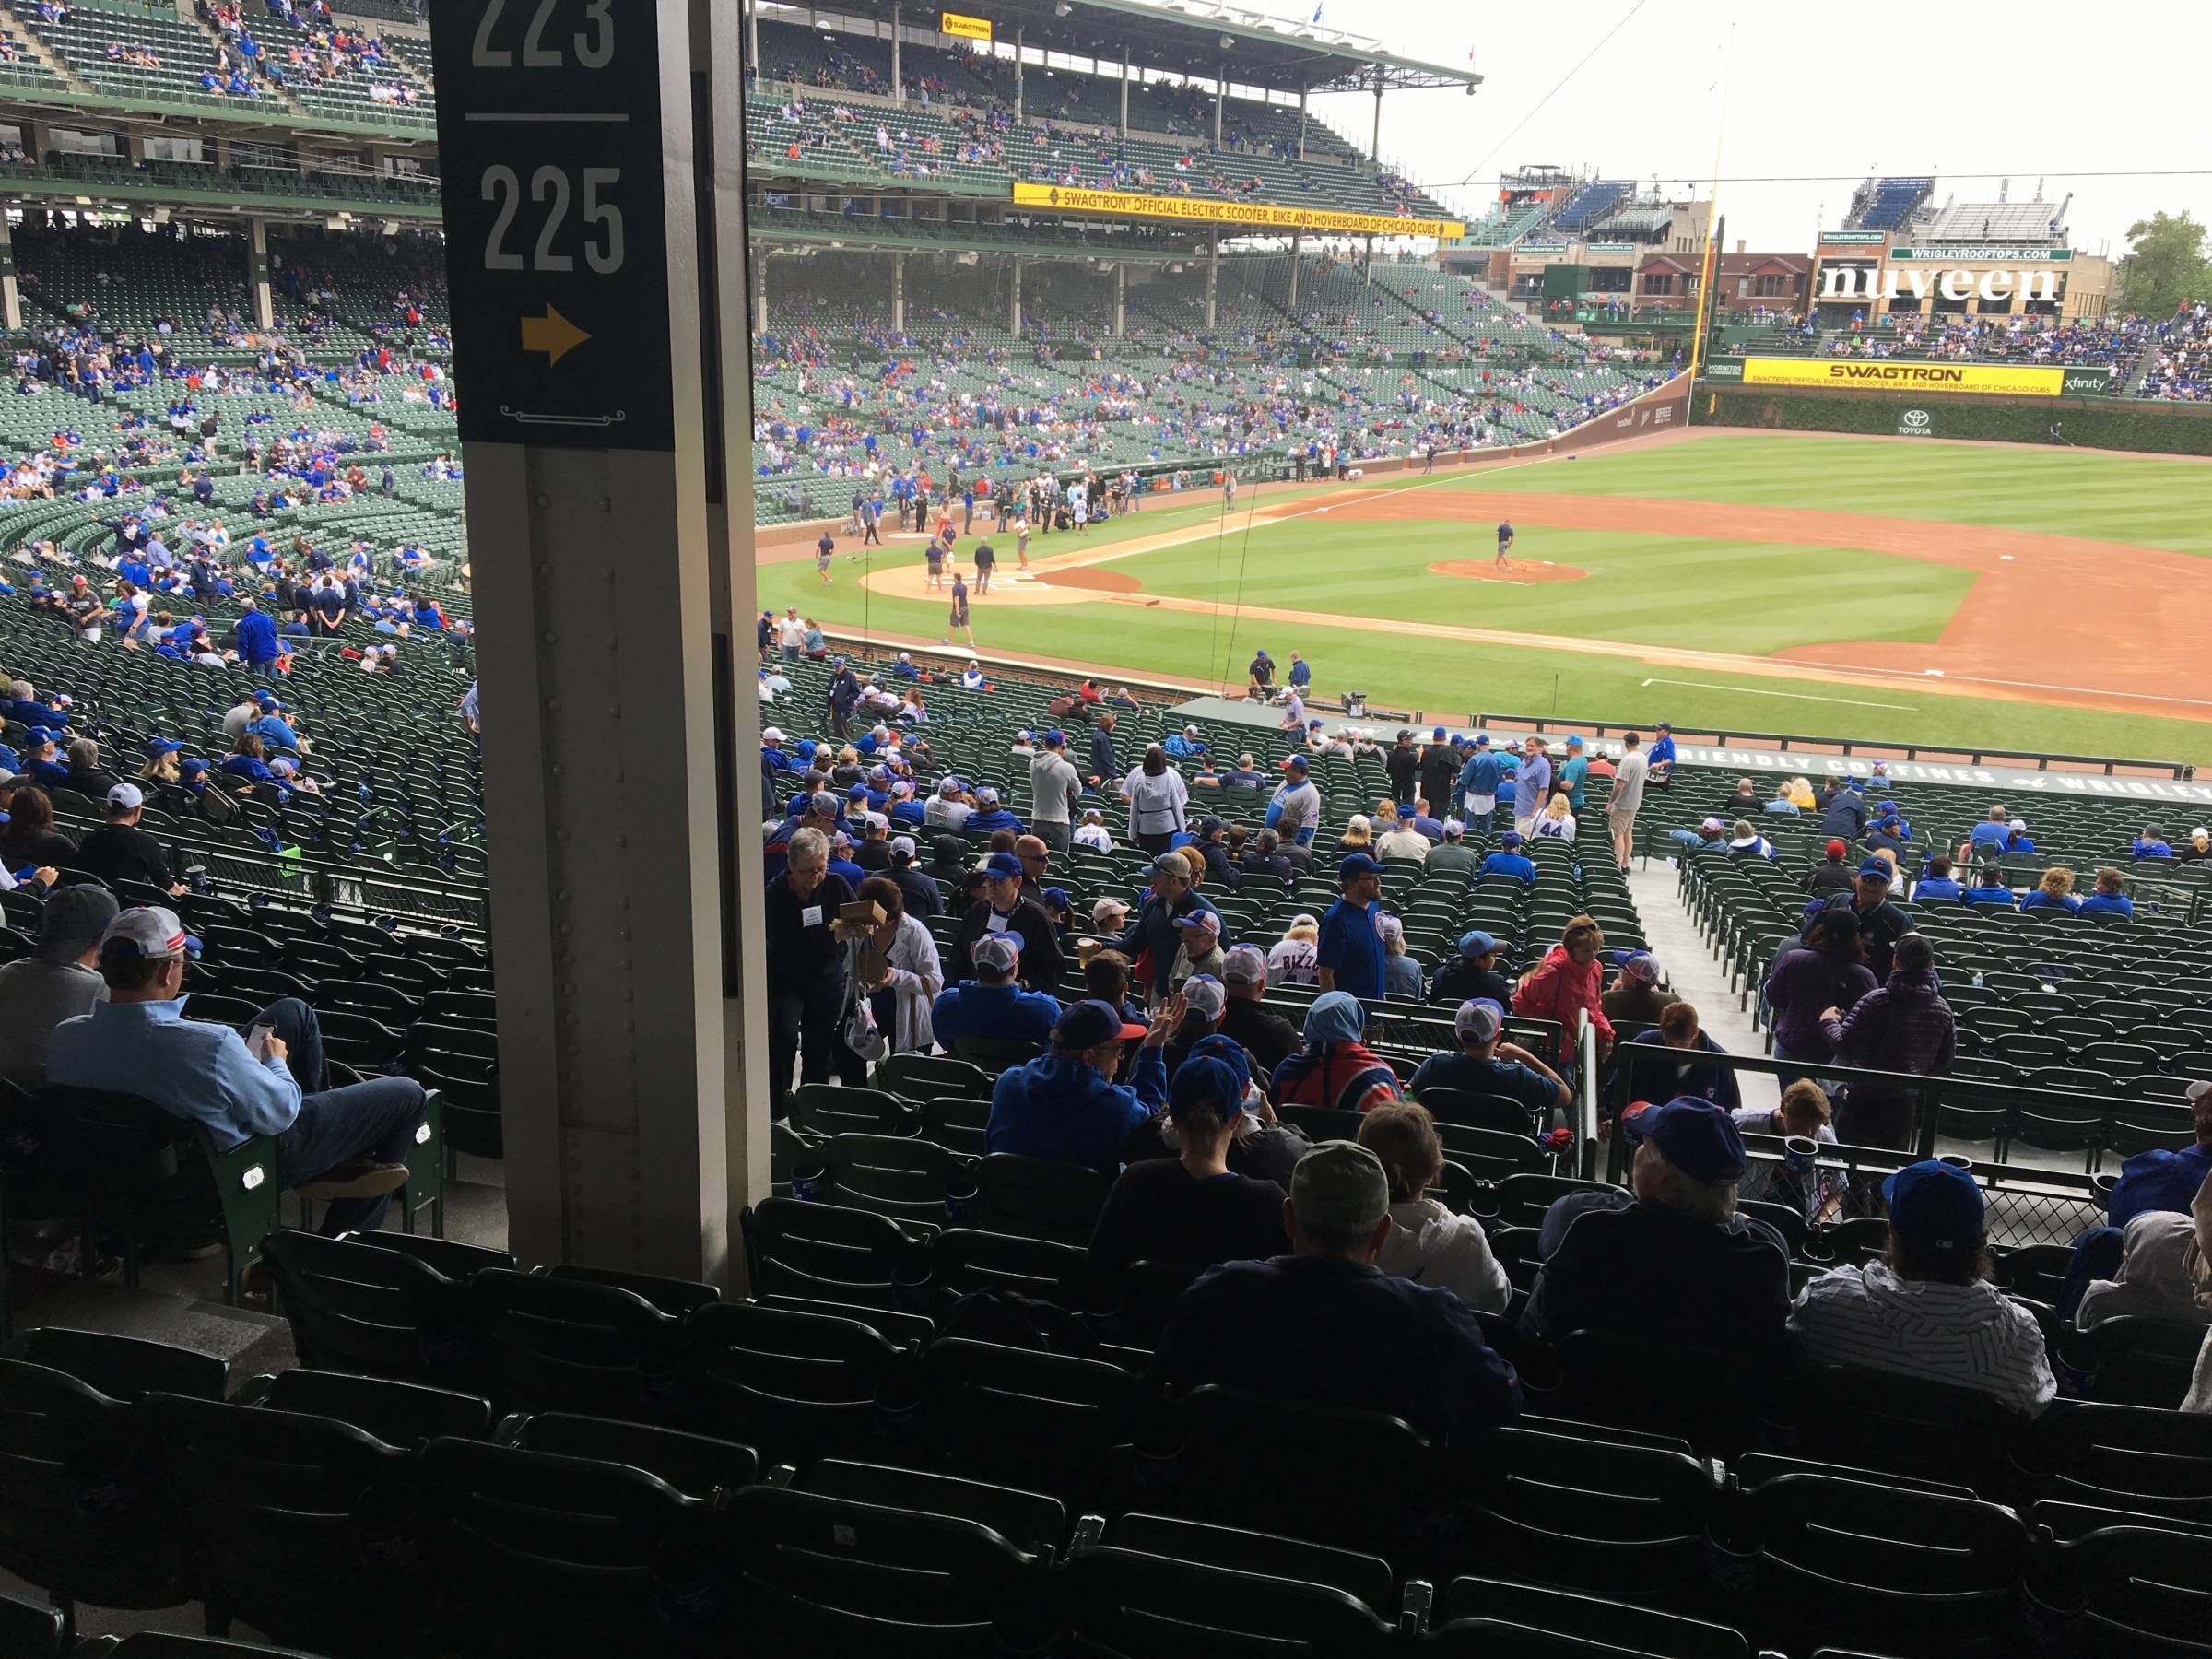 Pole in Section 225 at Wrigley Field